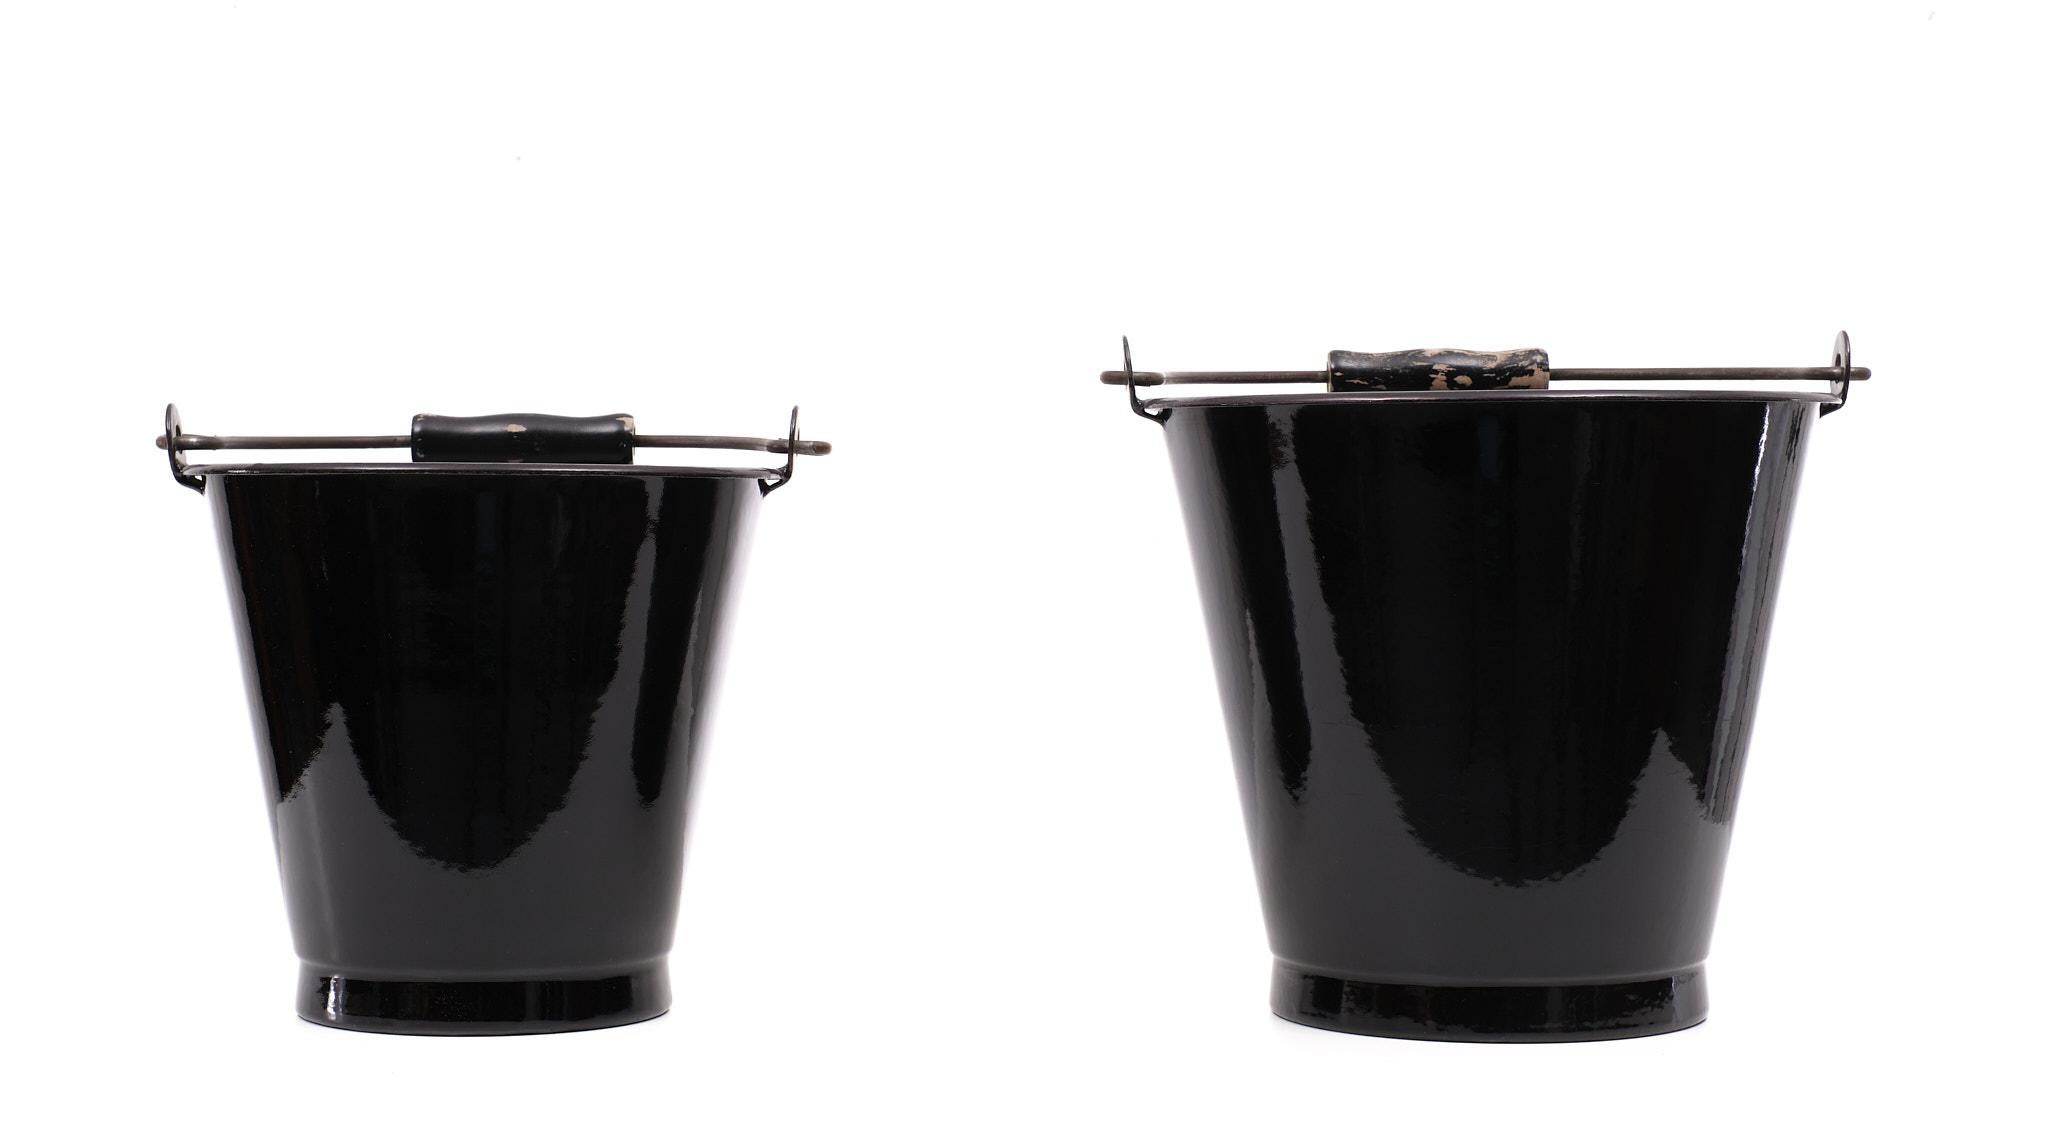 Unique set of buckets. These set bought in the 1950s was never used.
so new old stock. In a stunning Black Enamel color. Grey Enamel inside.
There is only some paint lose on the handles. I can fix that if you want. The buckets are really like new.